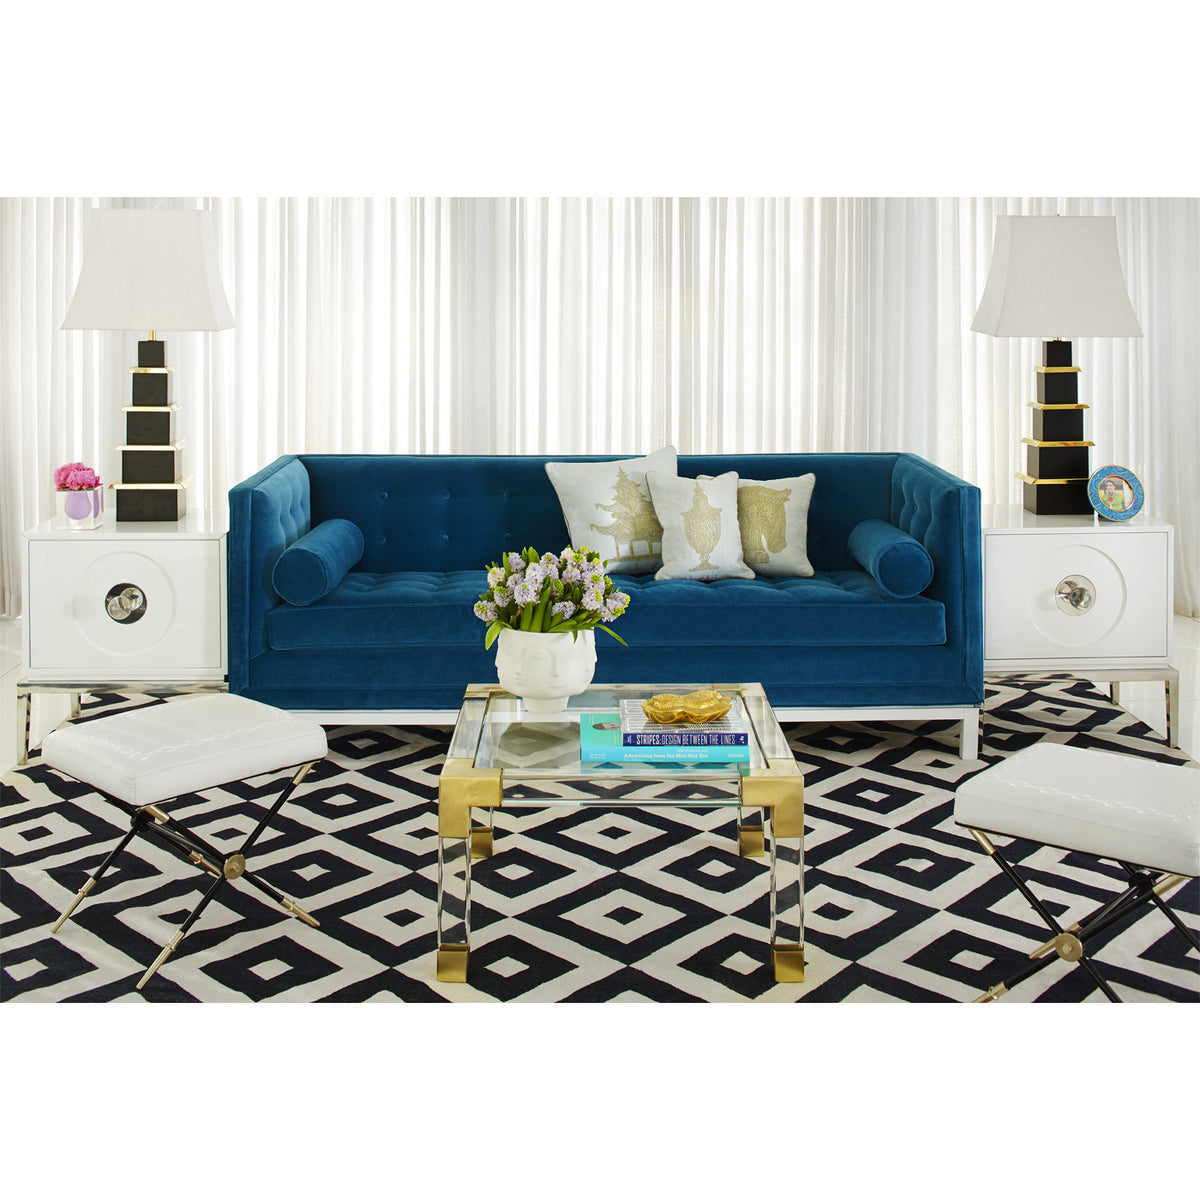 Channing Large End Table by Jonathan Adler